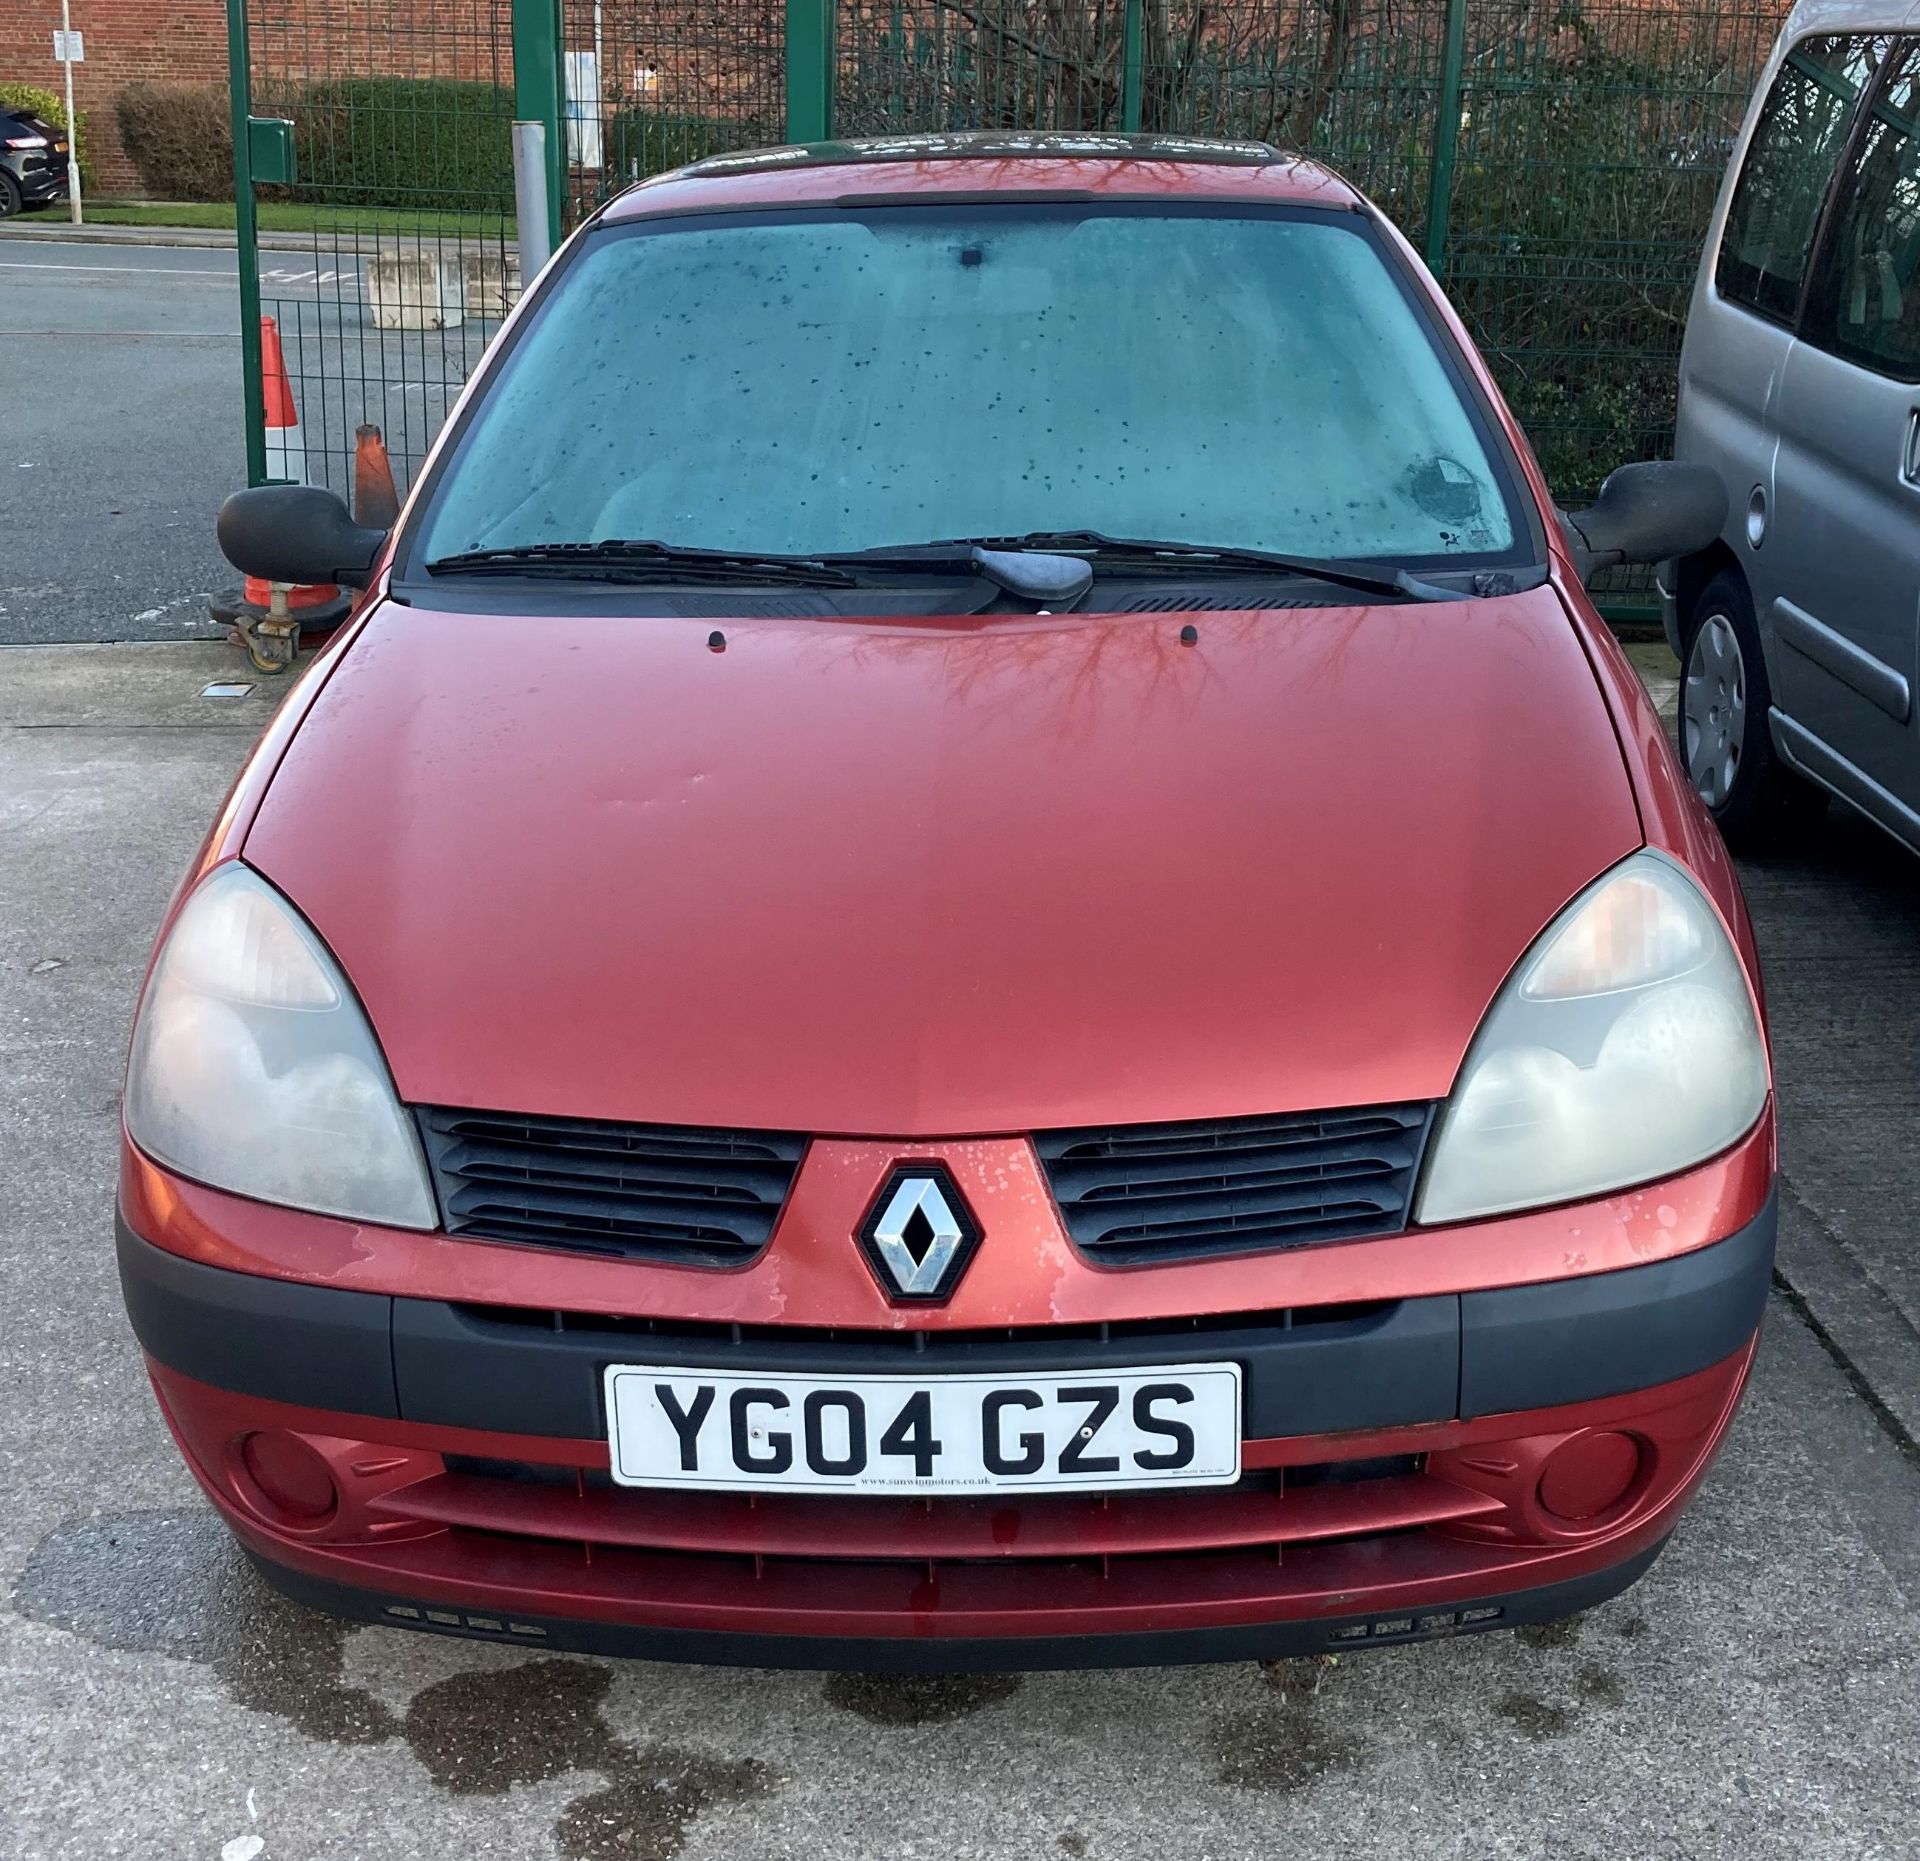 RENAULT CLIO EXPRESSION 16V (1149cc) THREE DOOR HATCHBACK - Petrol - Red. - Image 2 of 15